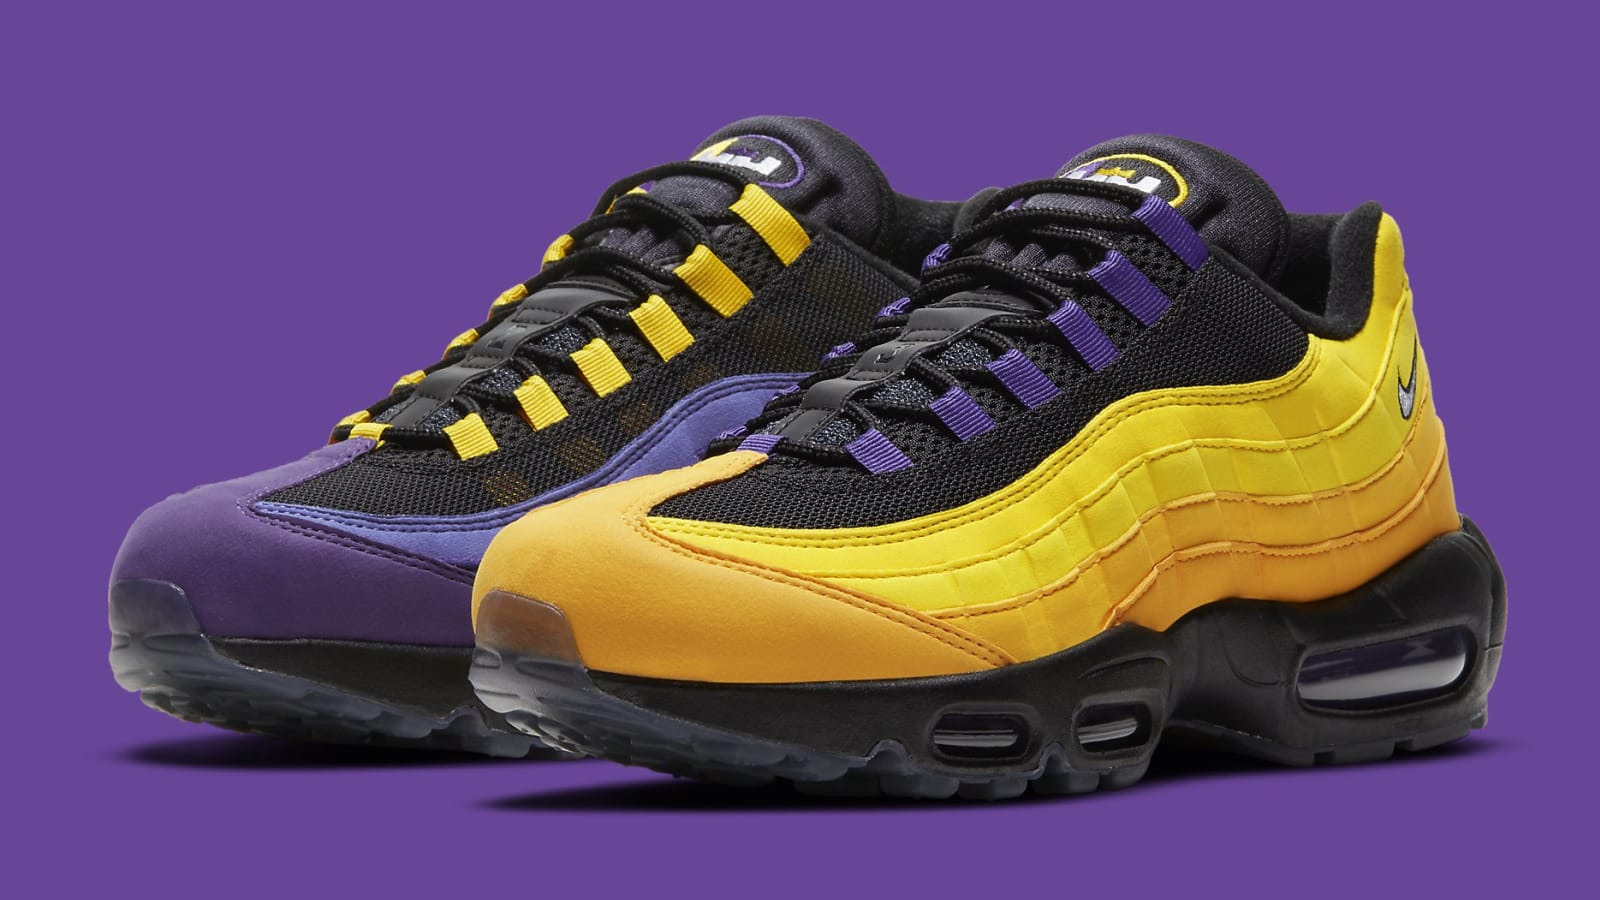 Nike Air Max 95 LeBron Lakers Gets New Release Date